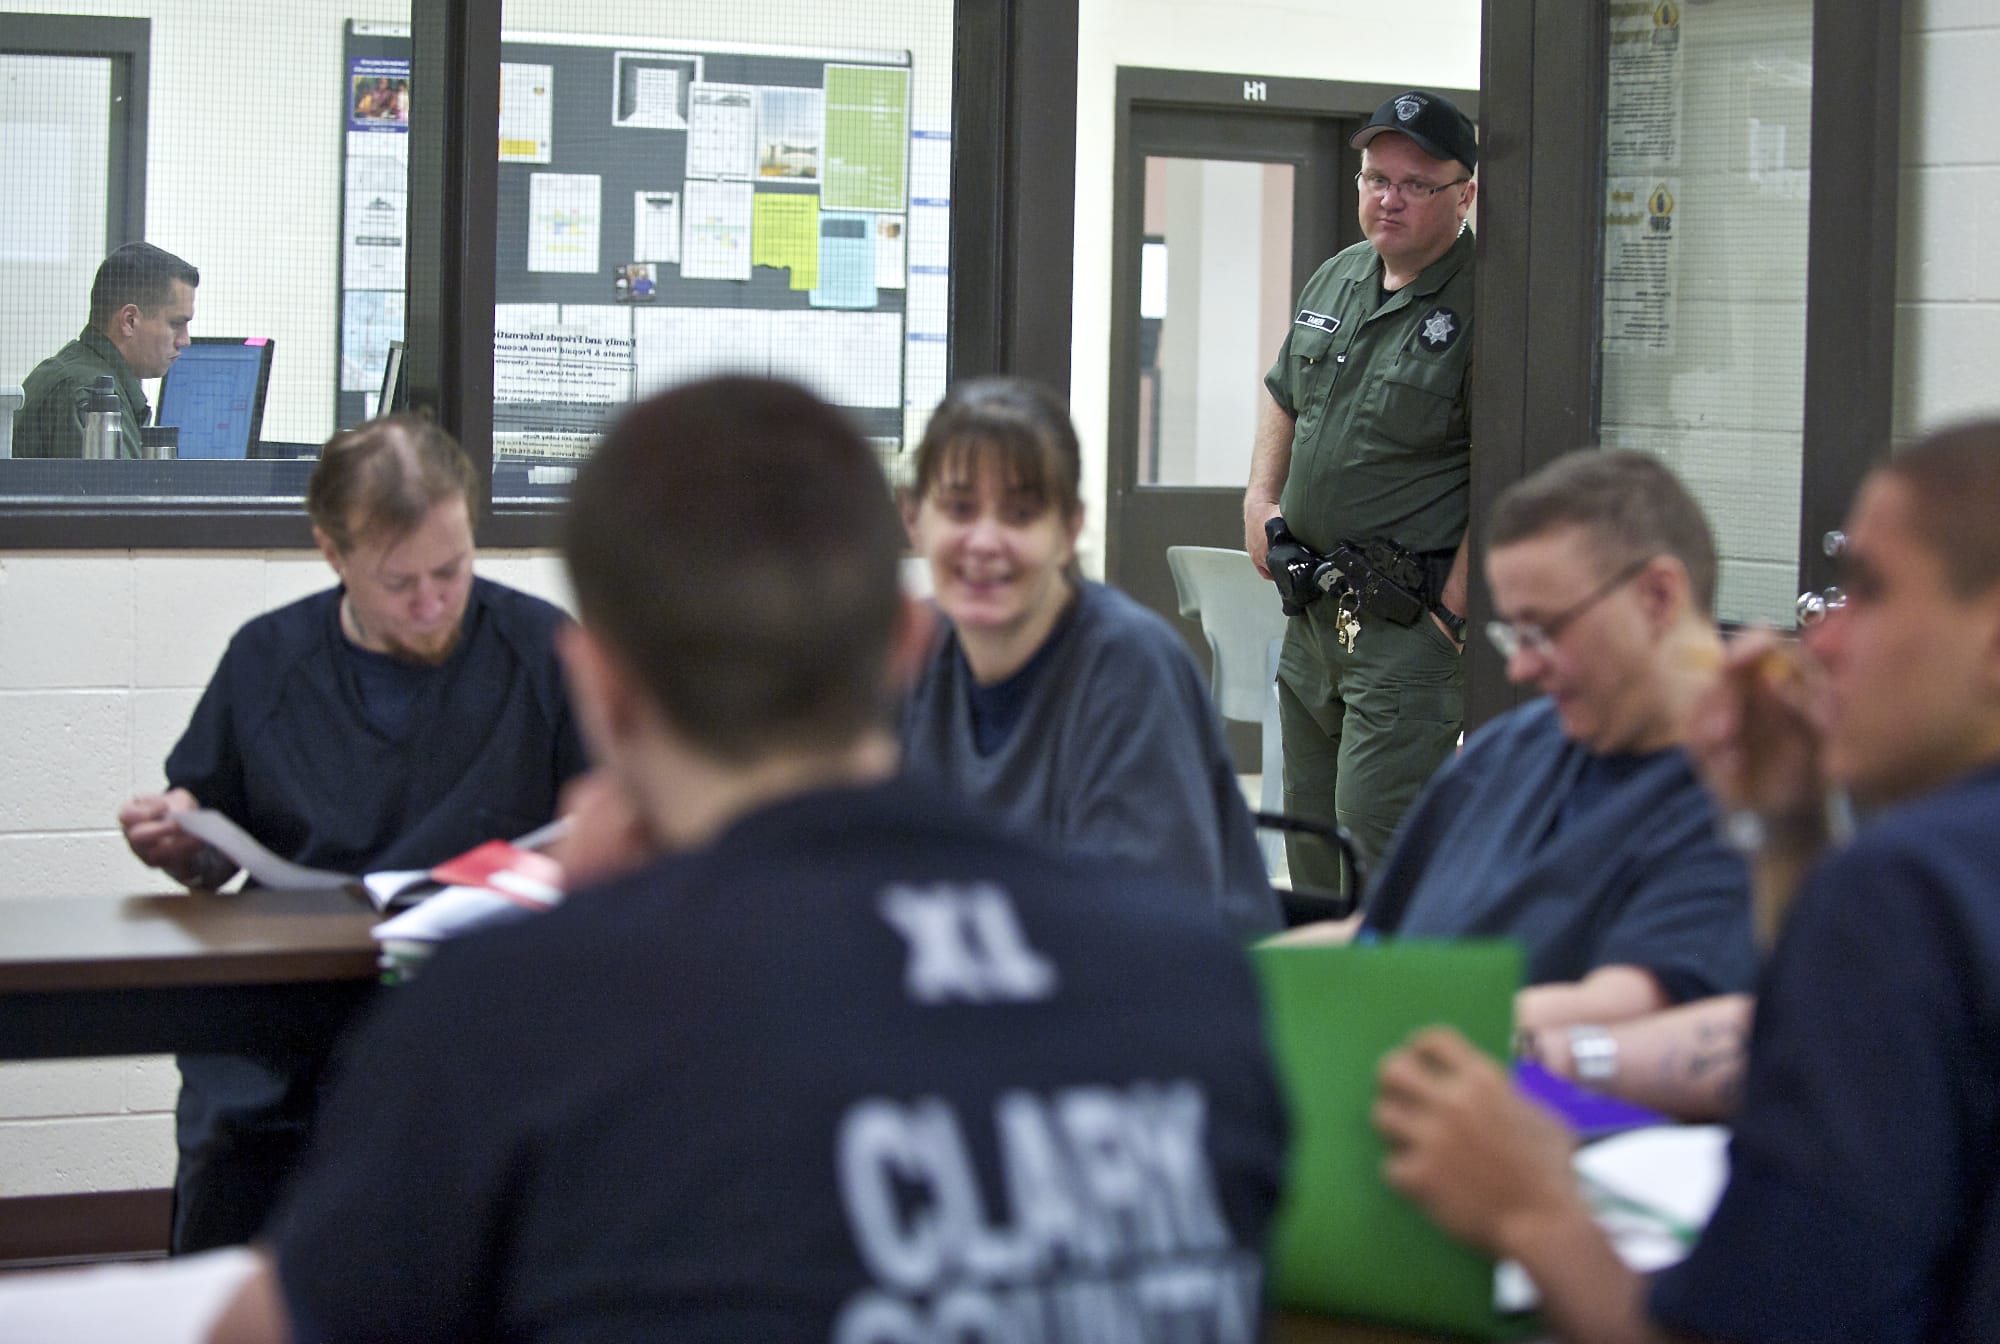 Sgt. Randy Tangen runs the Re-entry Program at the Clark County Jail, which aims at connecting inmates with tools to succeed once they're released. Since the program began Feb.